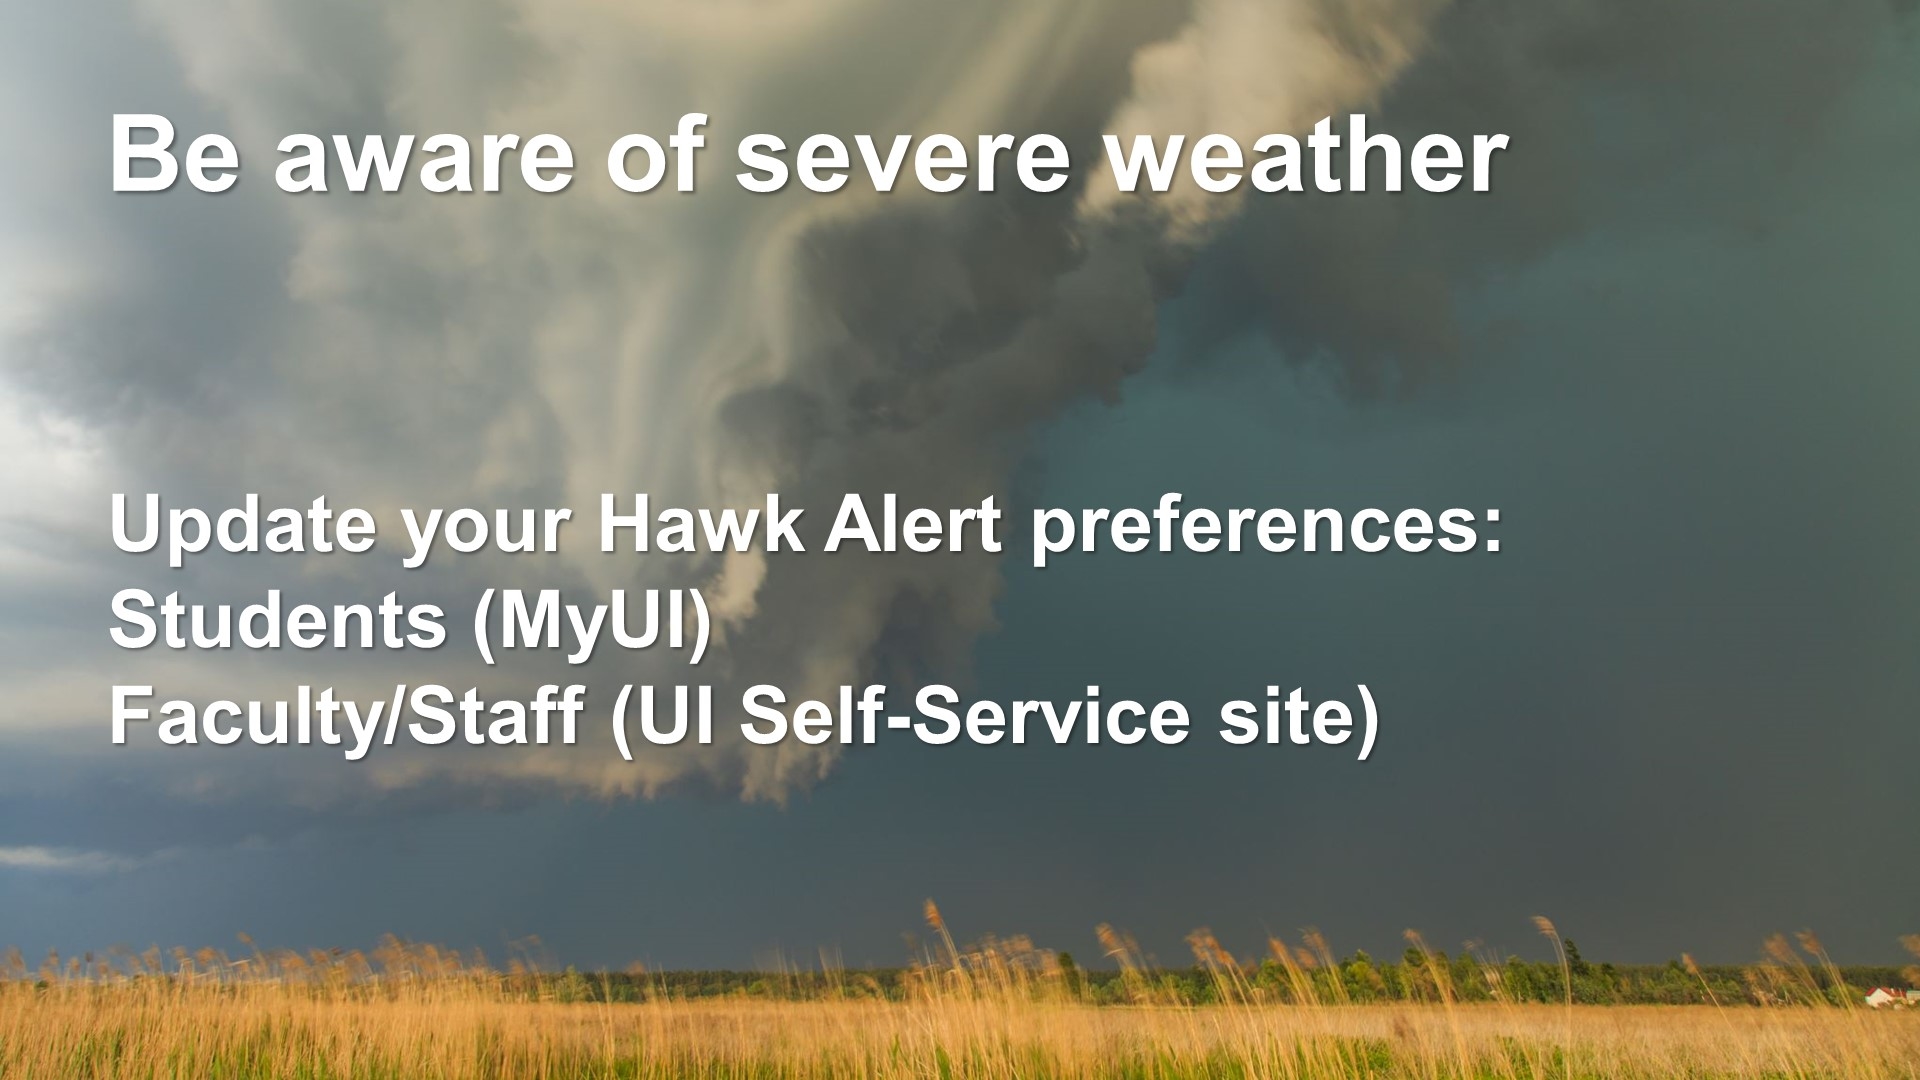 Be aware of severe weather. Update your HawkAlert preferences: Students (MyUI), Faculty/Staff (UI Self-Service site)